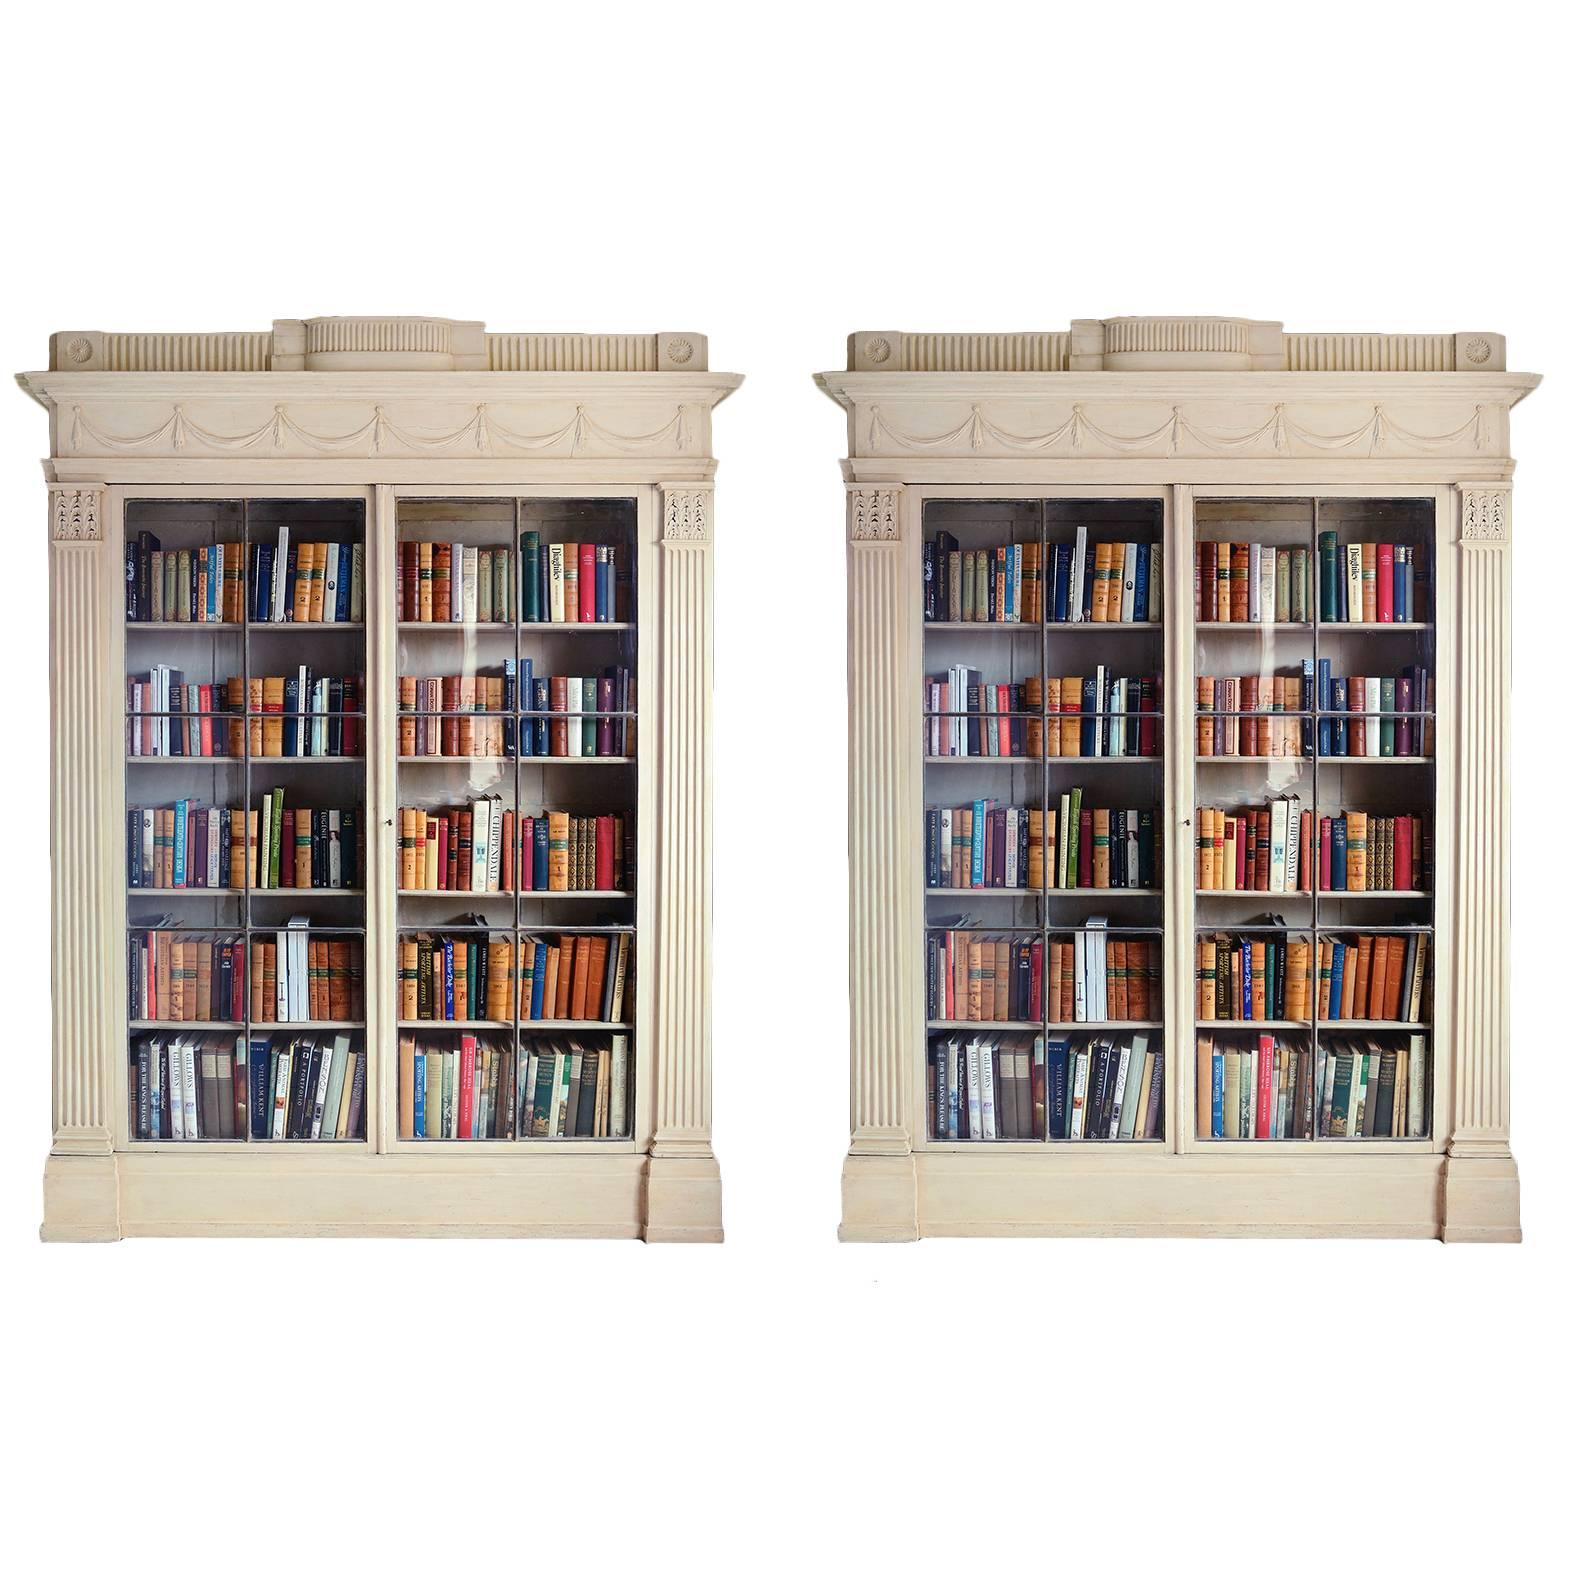 Pair of 18th Century White Painted Bookcases in the manner of James Wyatt